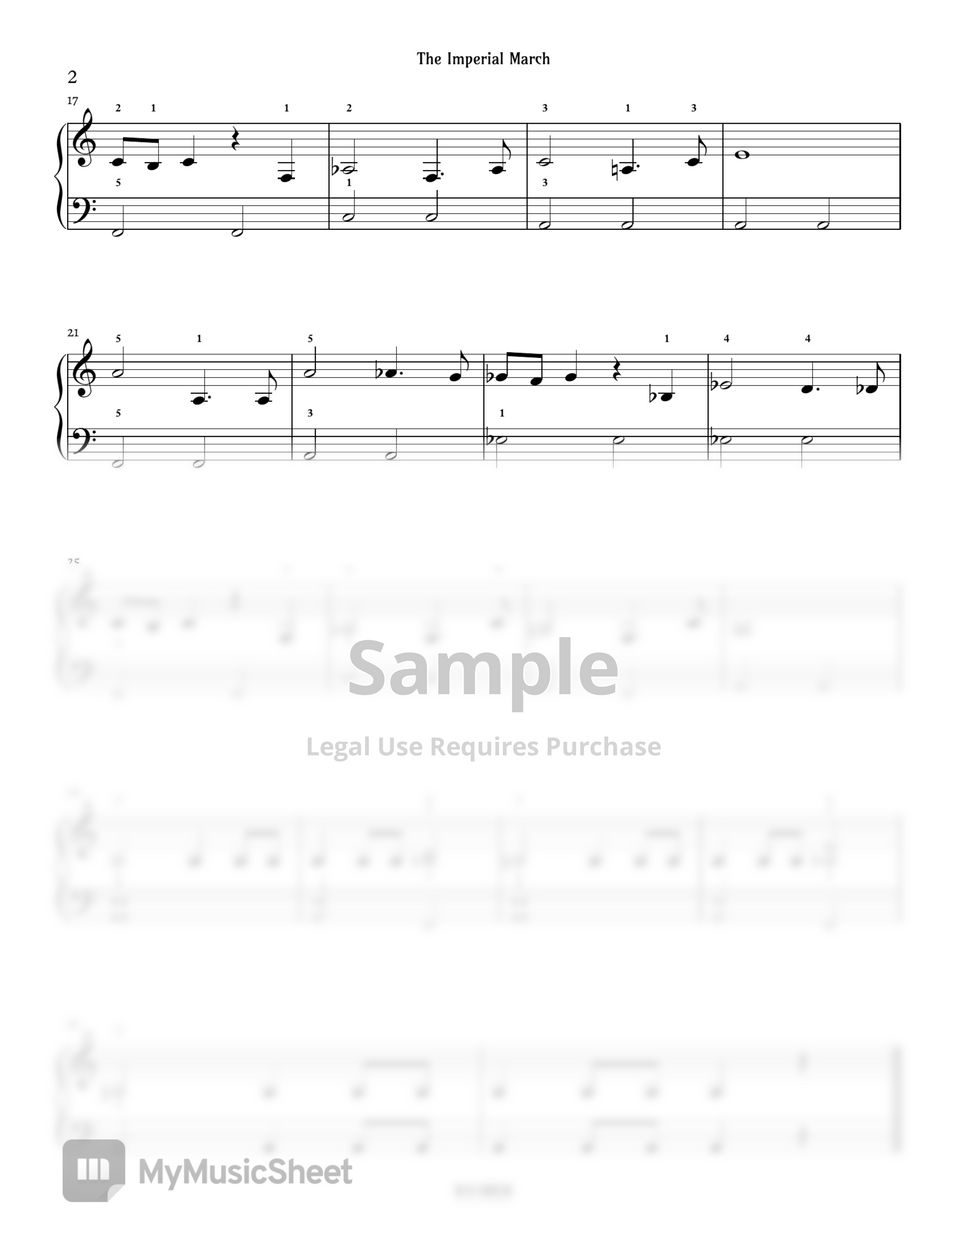 John Williams - [Easy] Imperial March (Star Wars) Sheets by PianoSSam